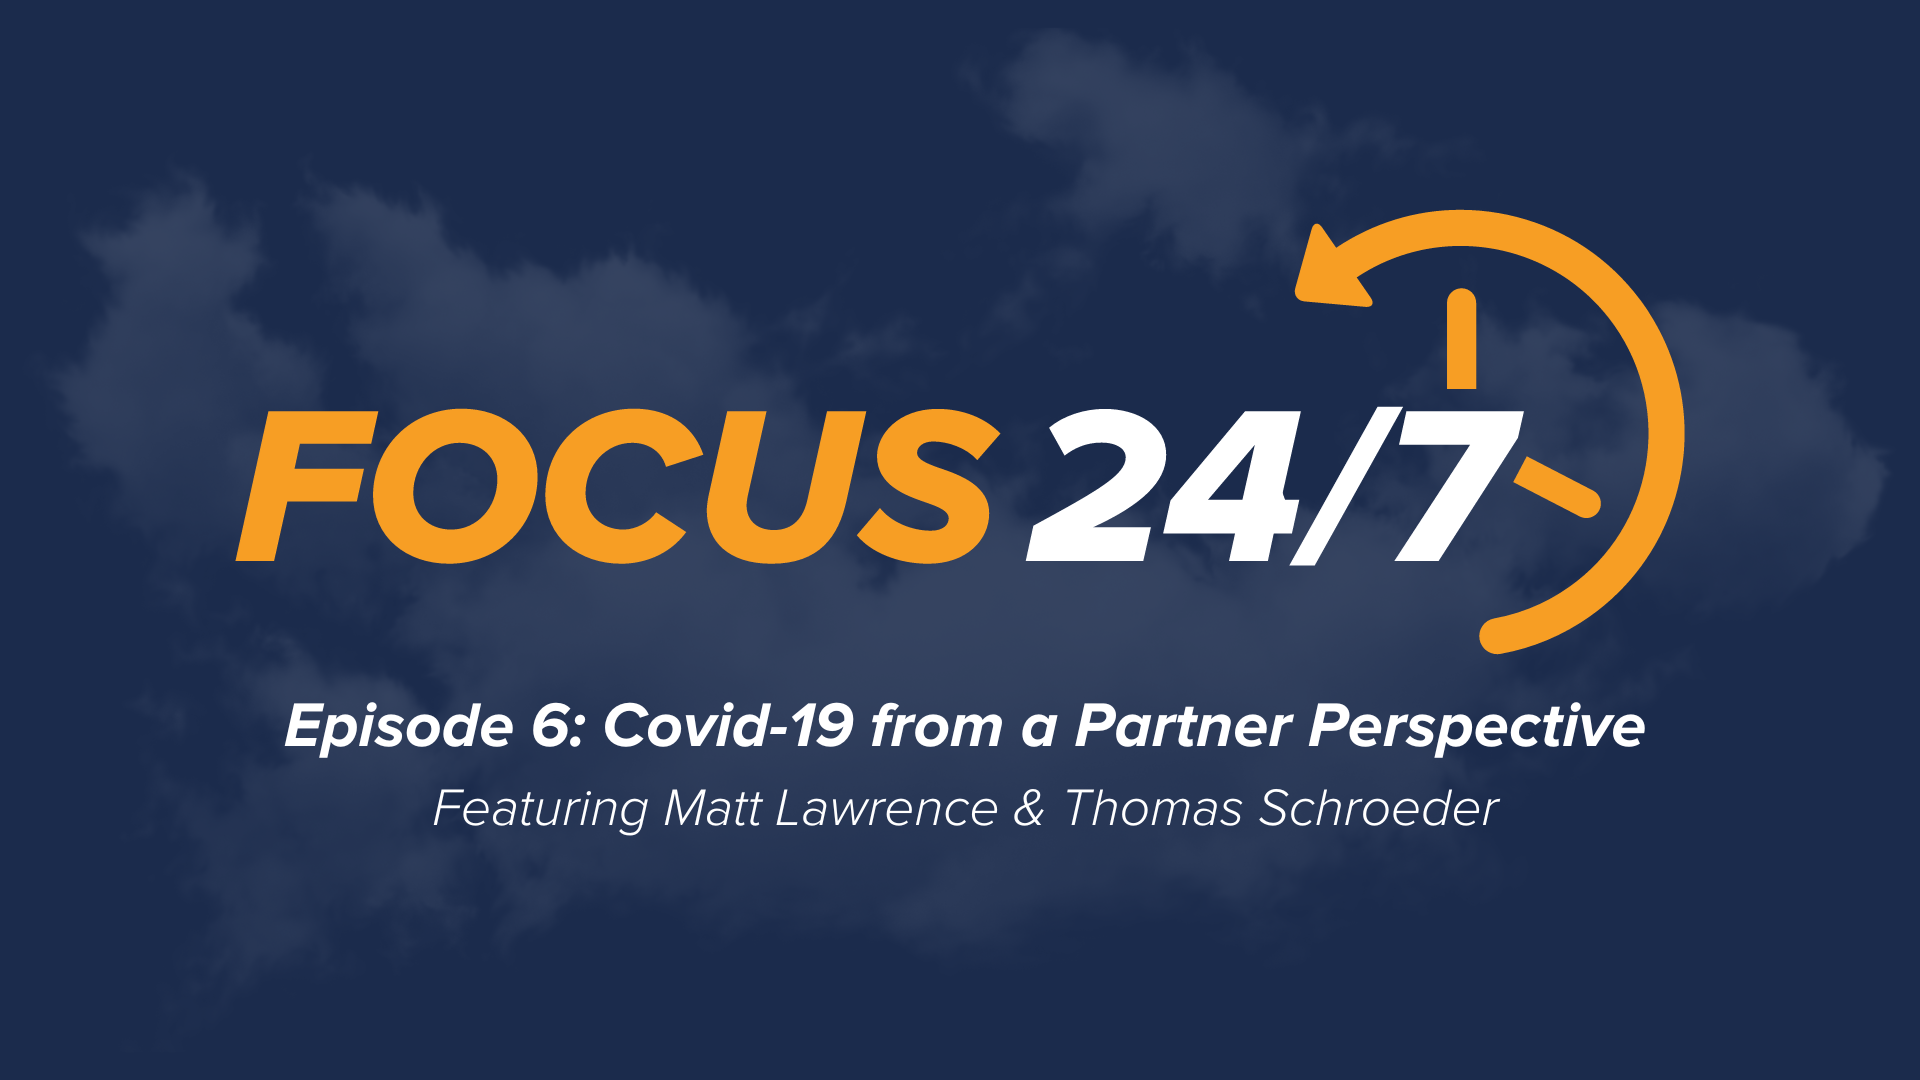 Focus 24/7 | Episode #6 | Covid-19 from a Partner Perspective ft Matt Lawrence and Thomas Schroeder